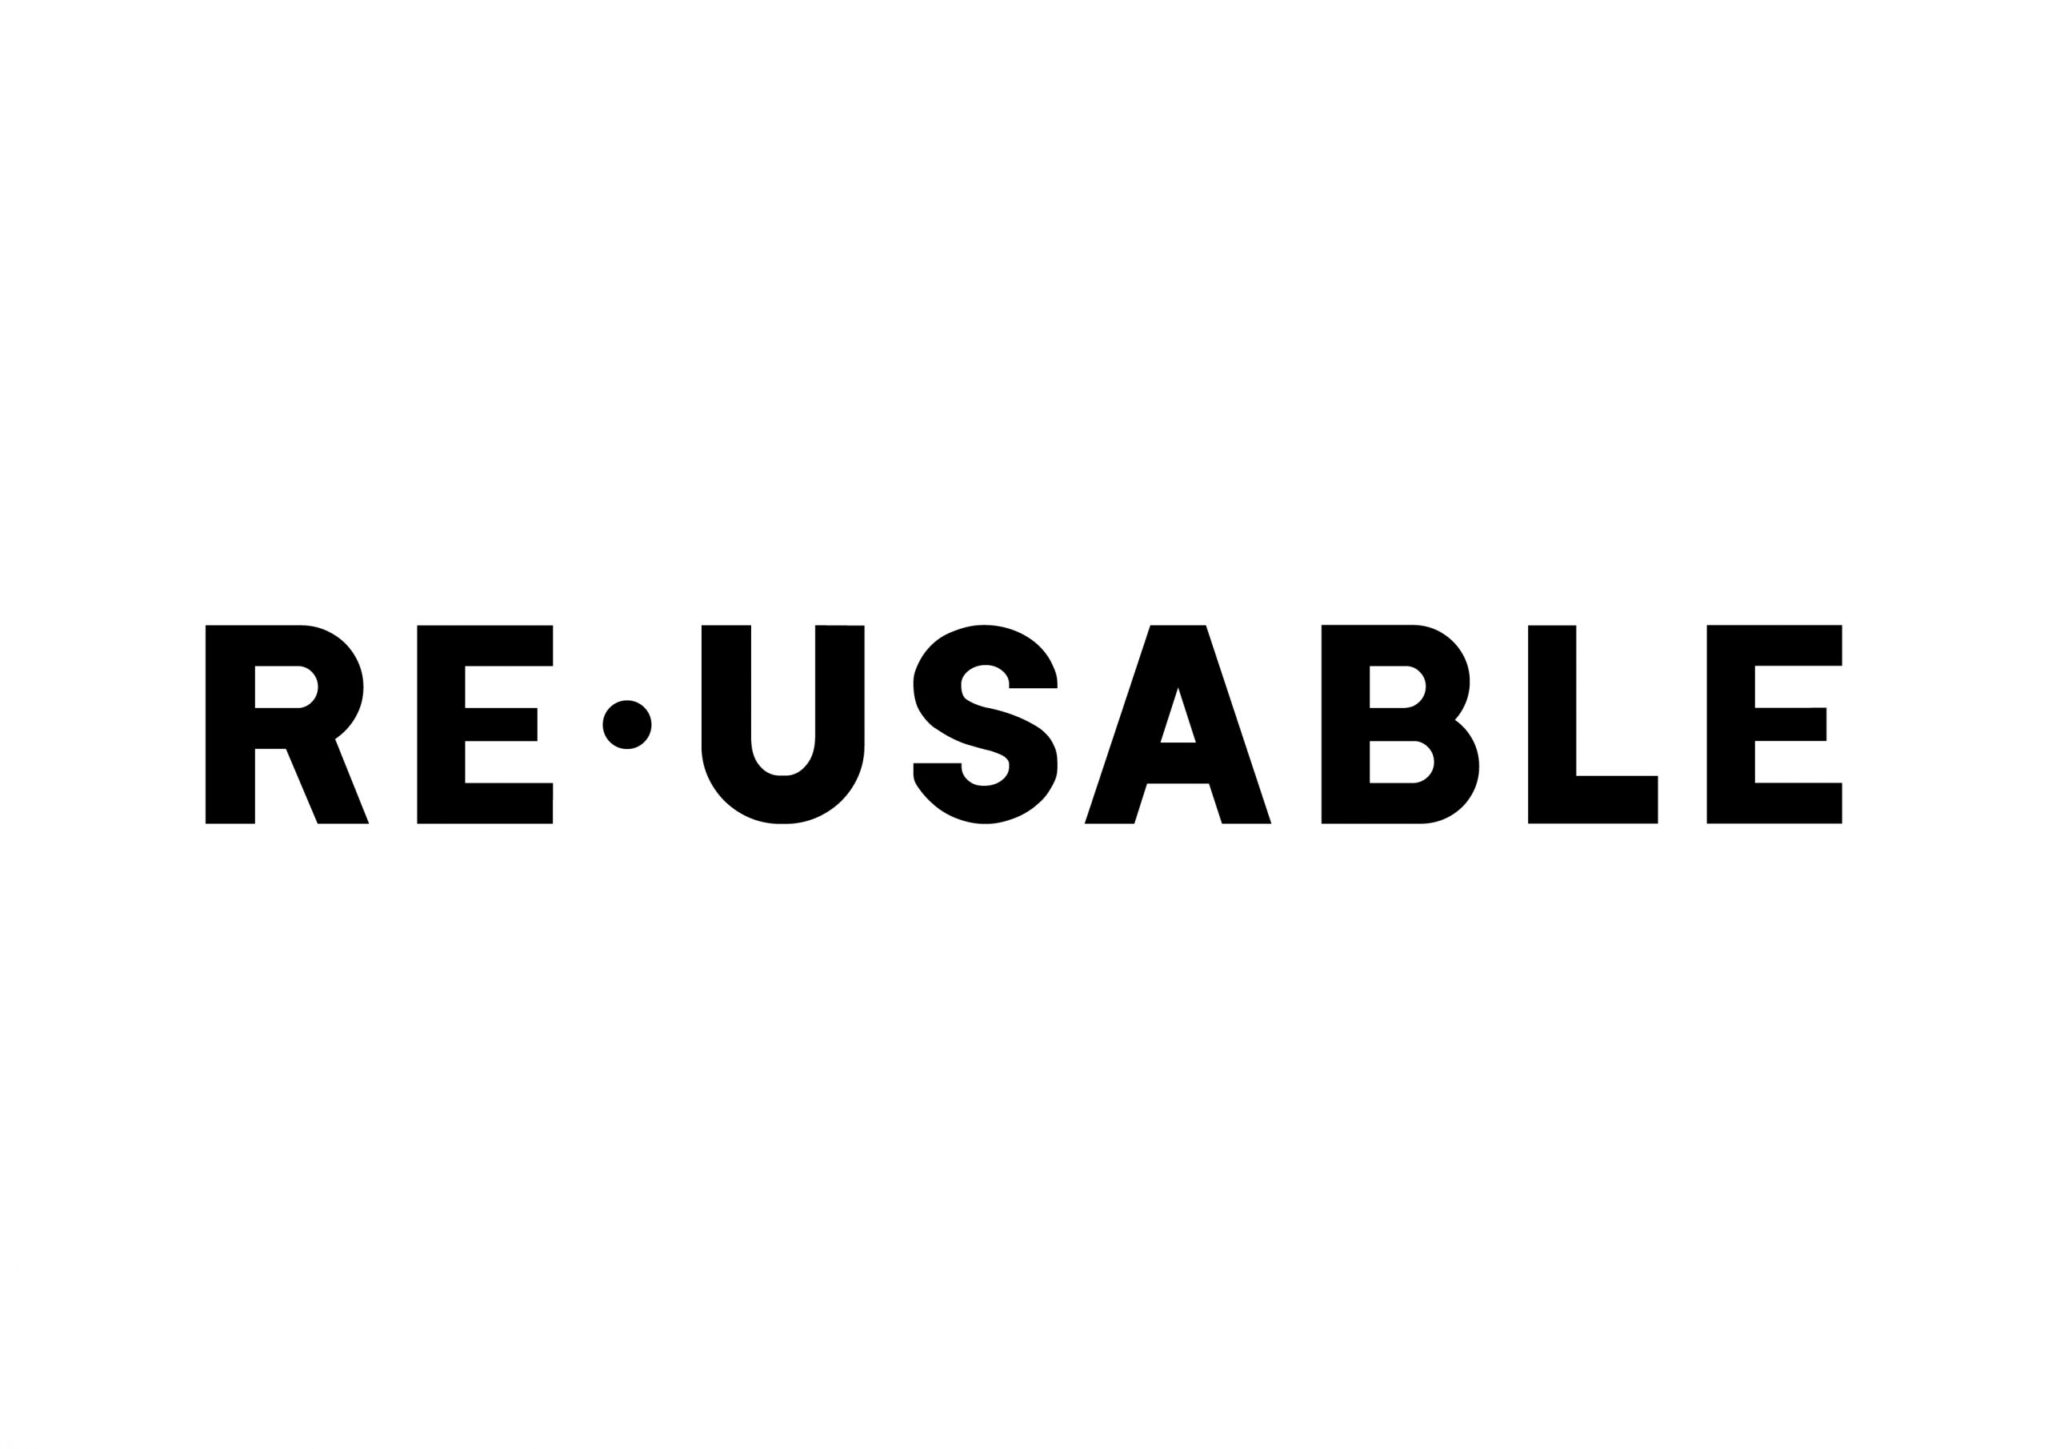 RE•USABLE